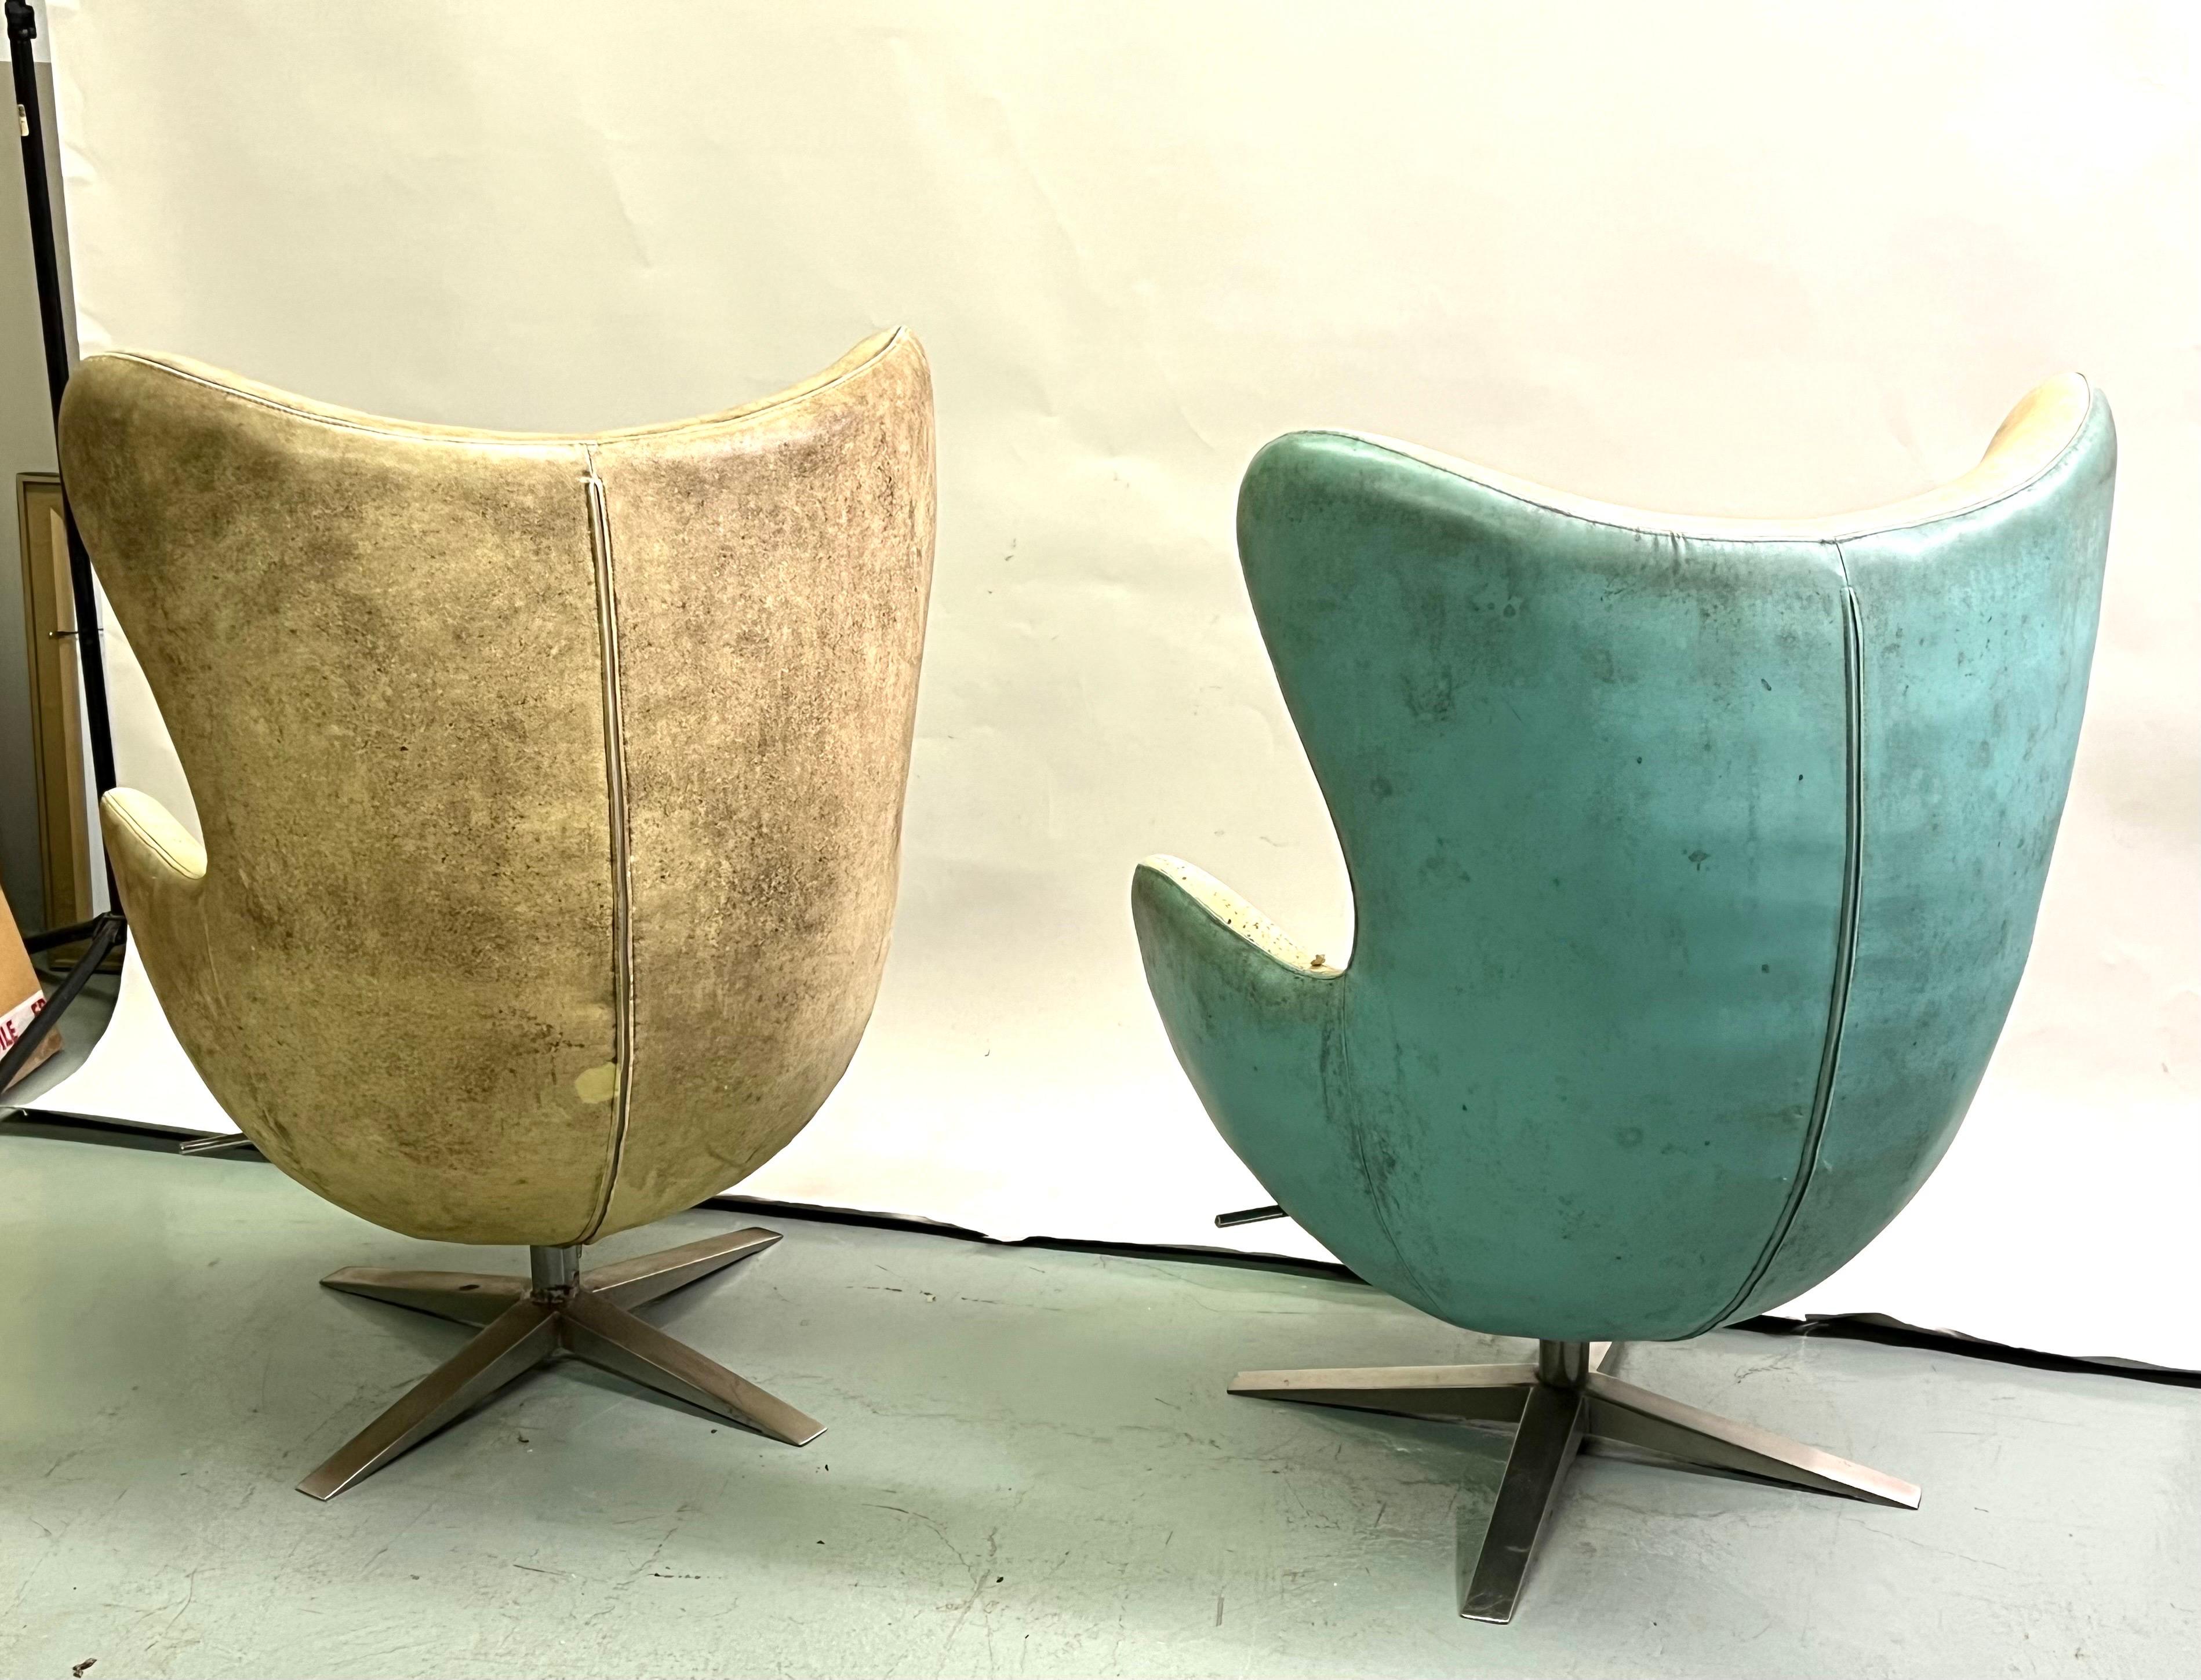 Stainless Steel Early Model, Pair of Vintage Leather Danish Egg Chair, Arne Jacobsen, c. 1960 For Sale